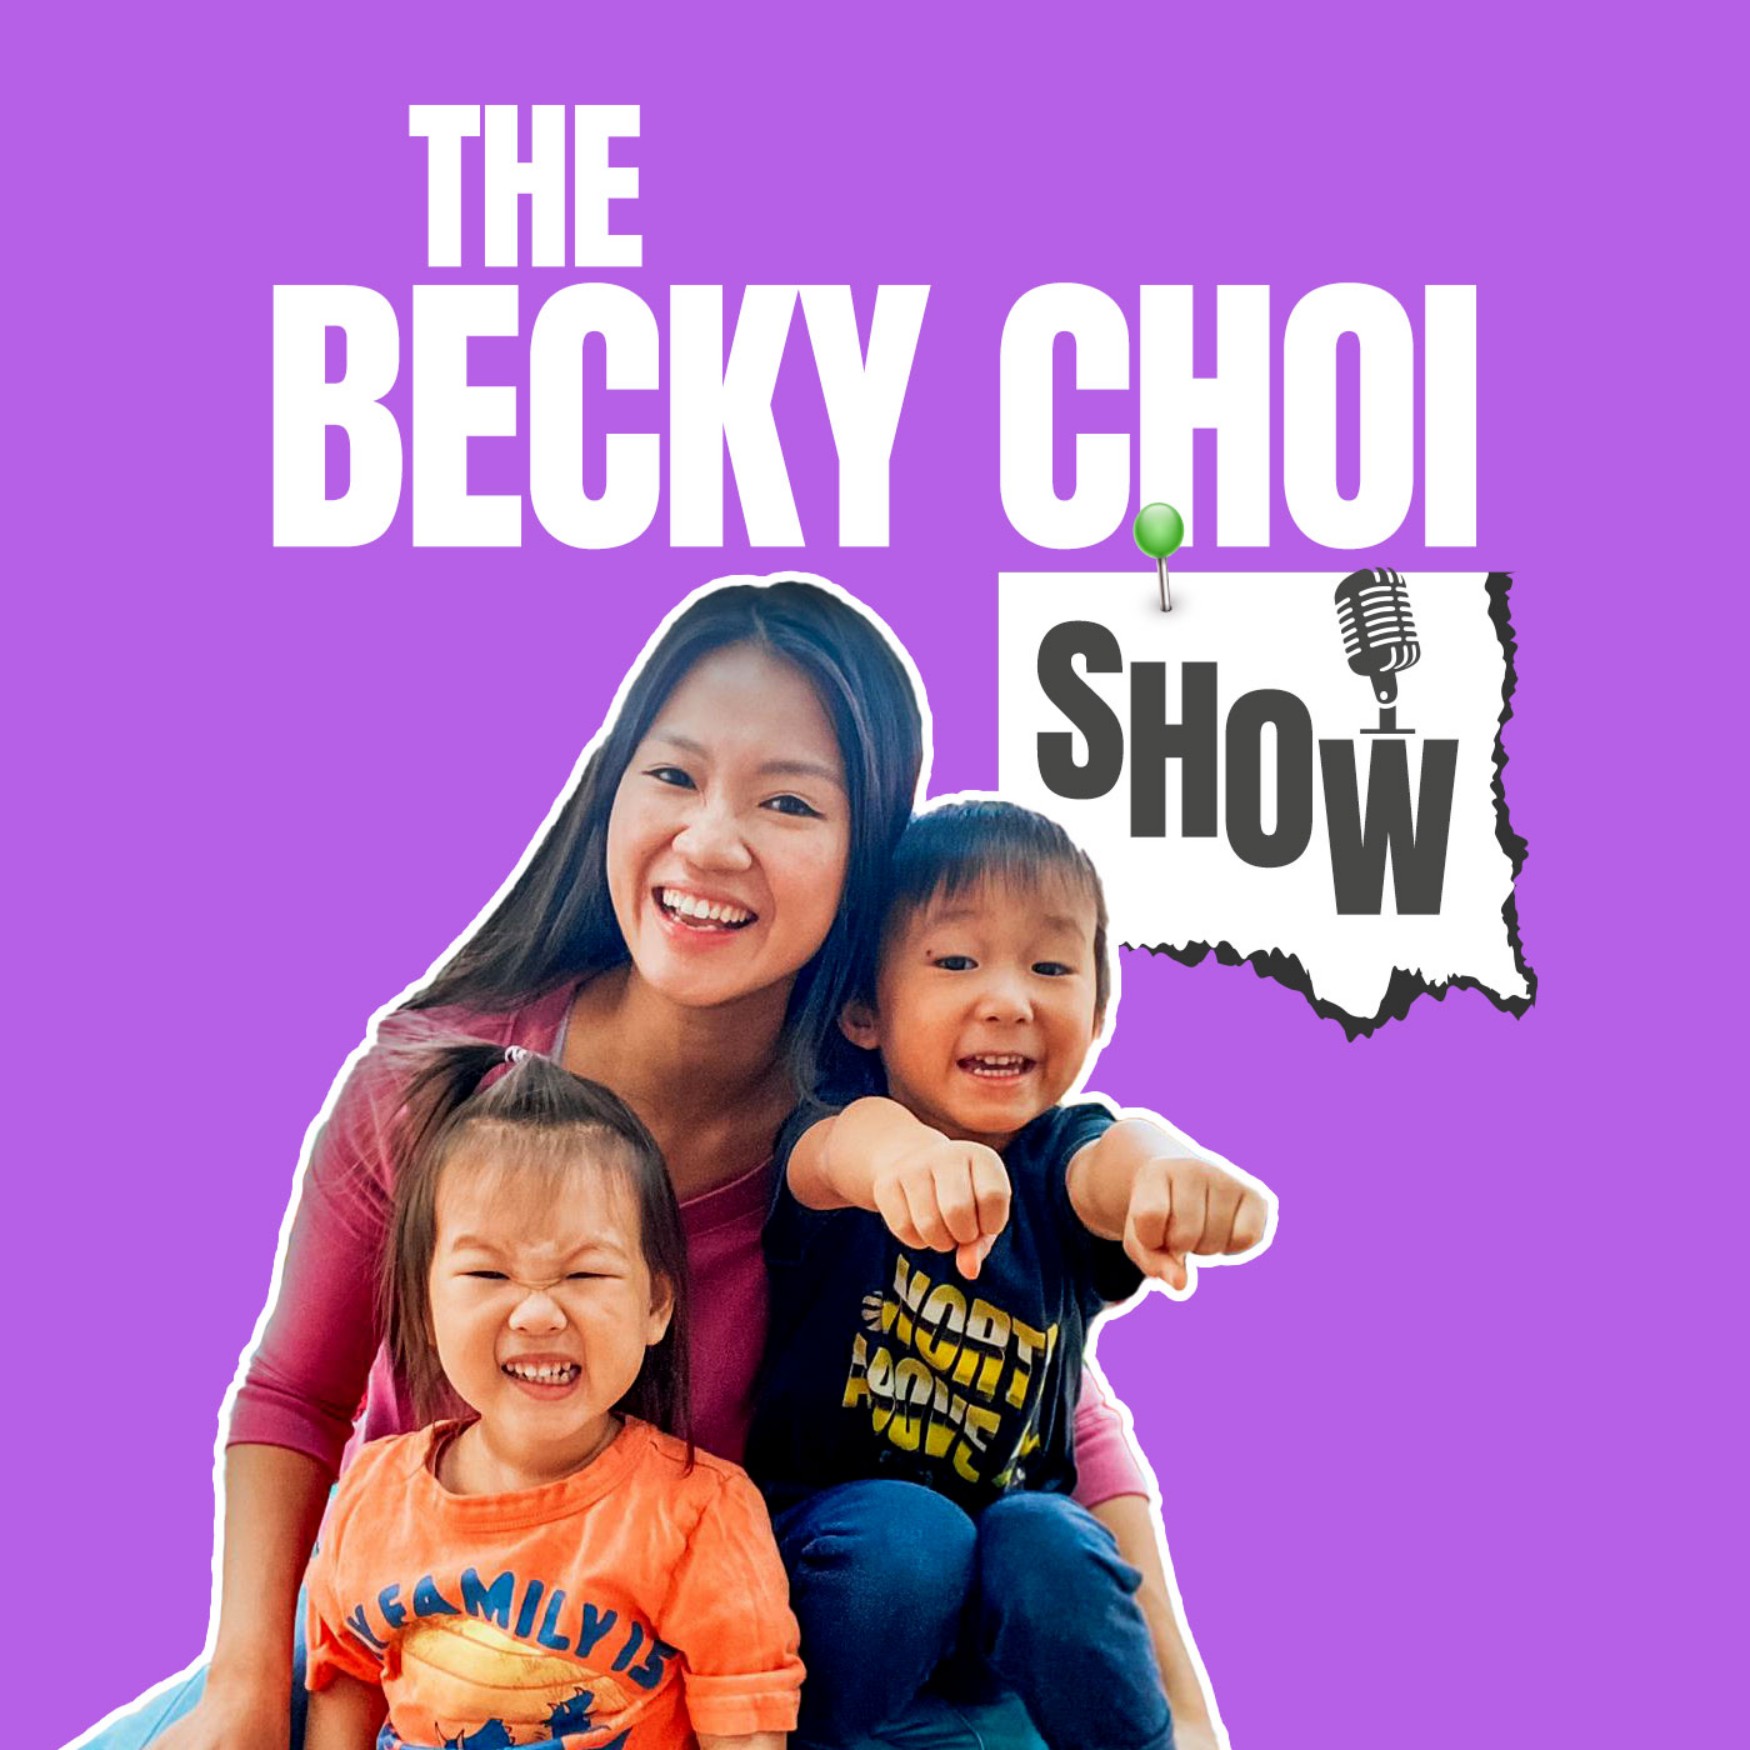 The Becky Choi Show